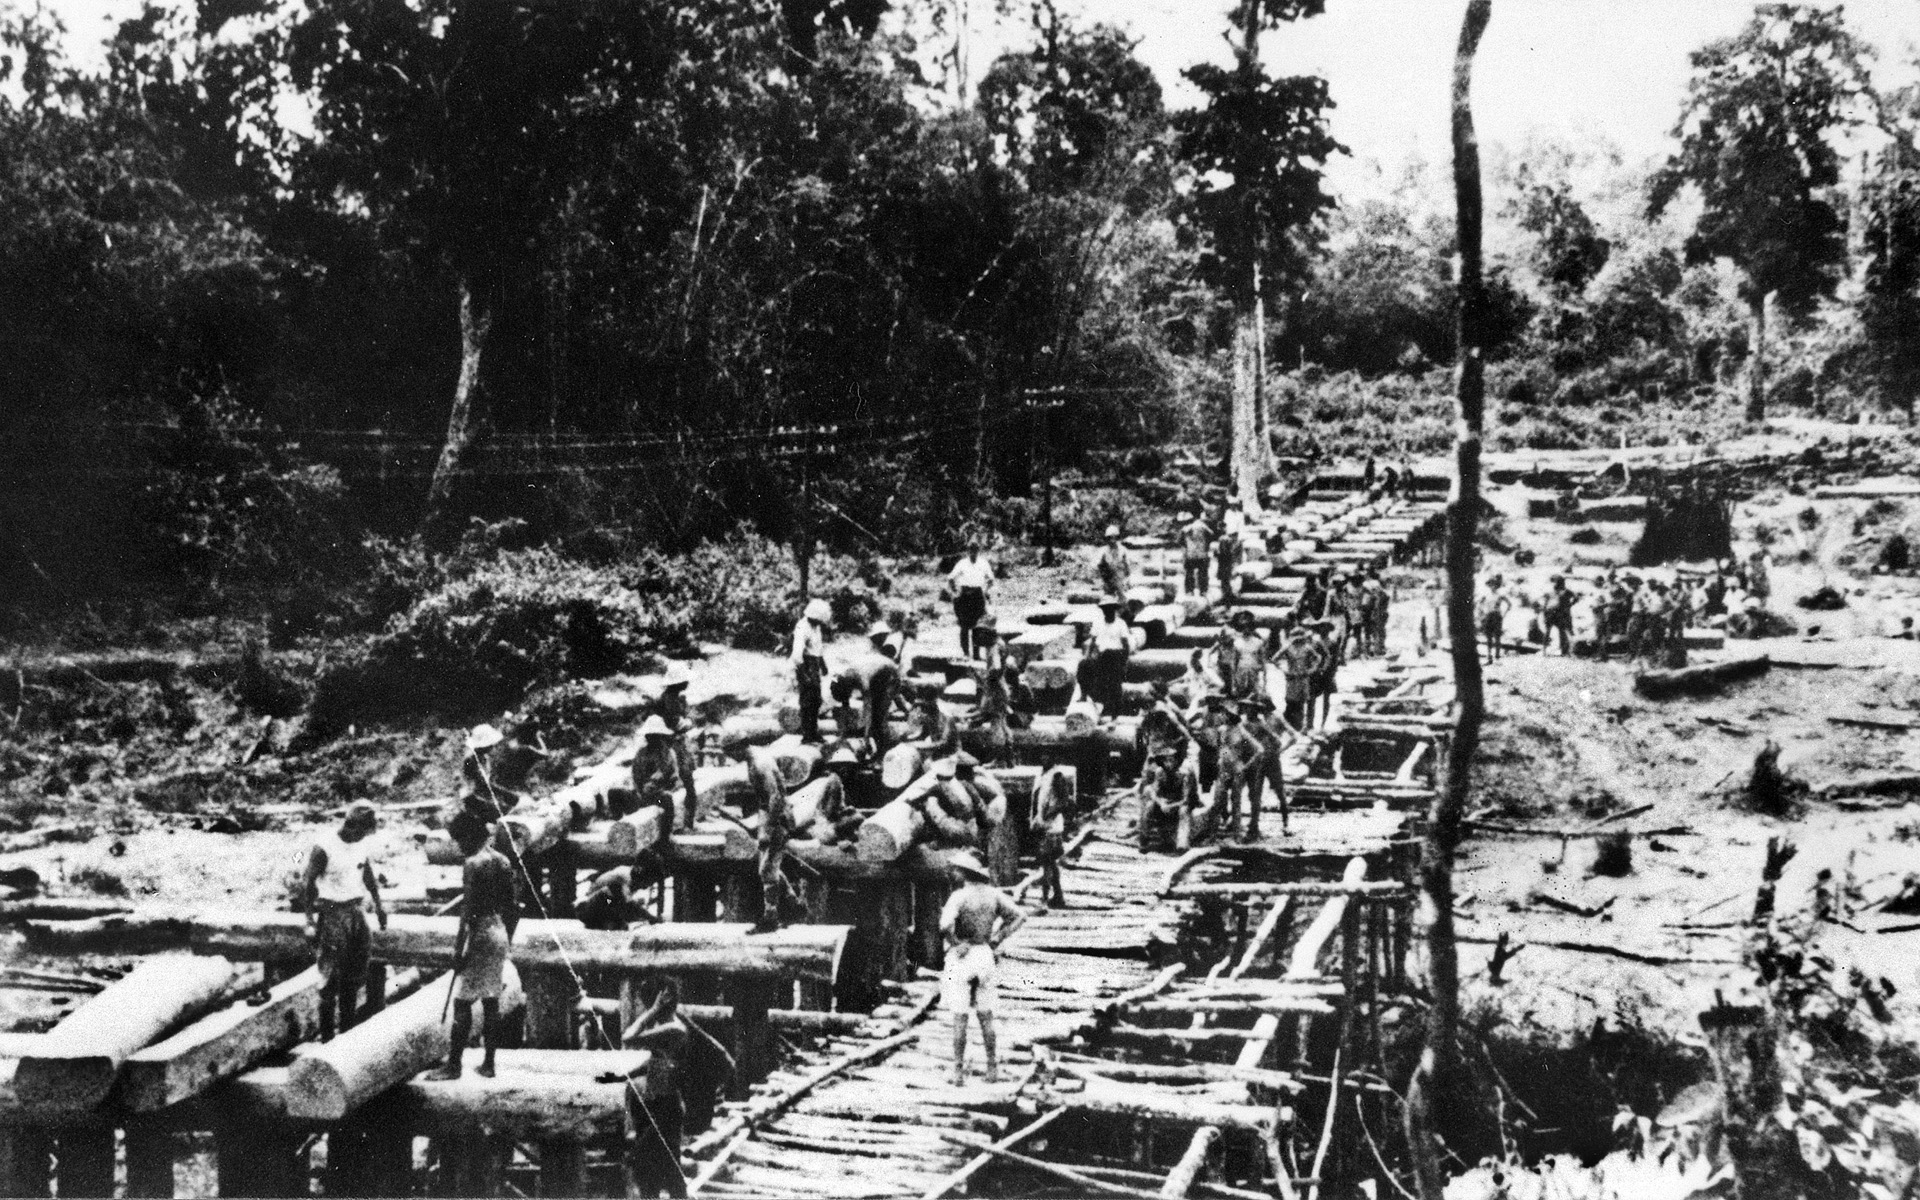 Prisoners move heavy logs during the construction of one of the many bridges built over several rivers. Virtually all the work was labor intensive and performed by hand.